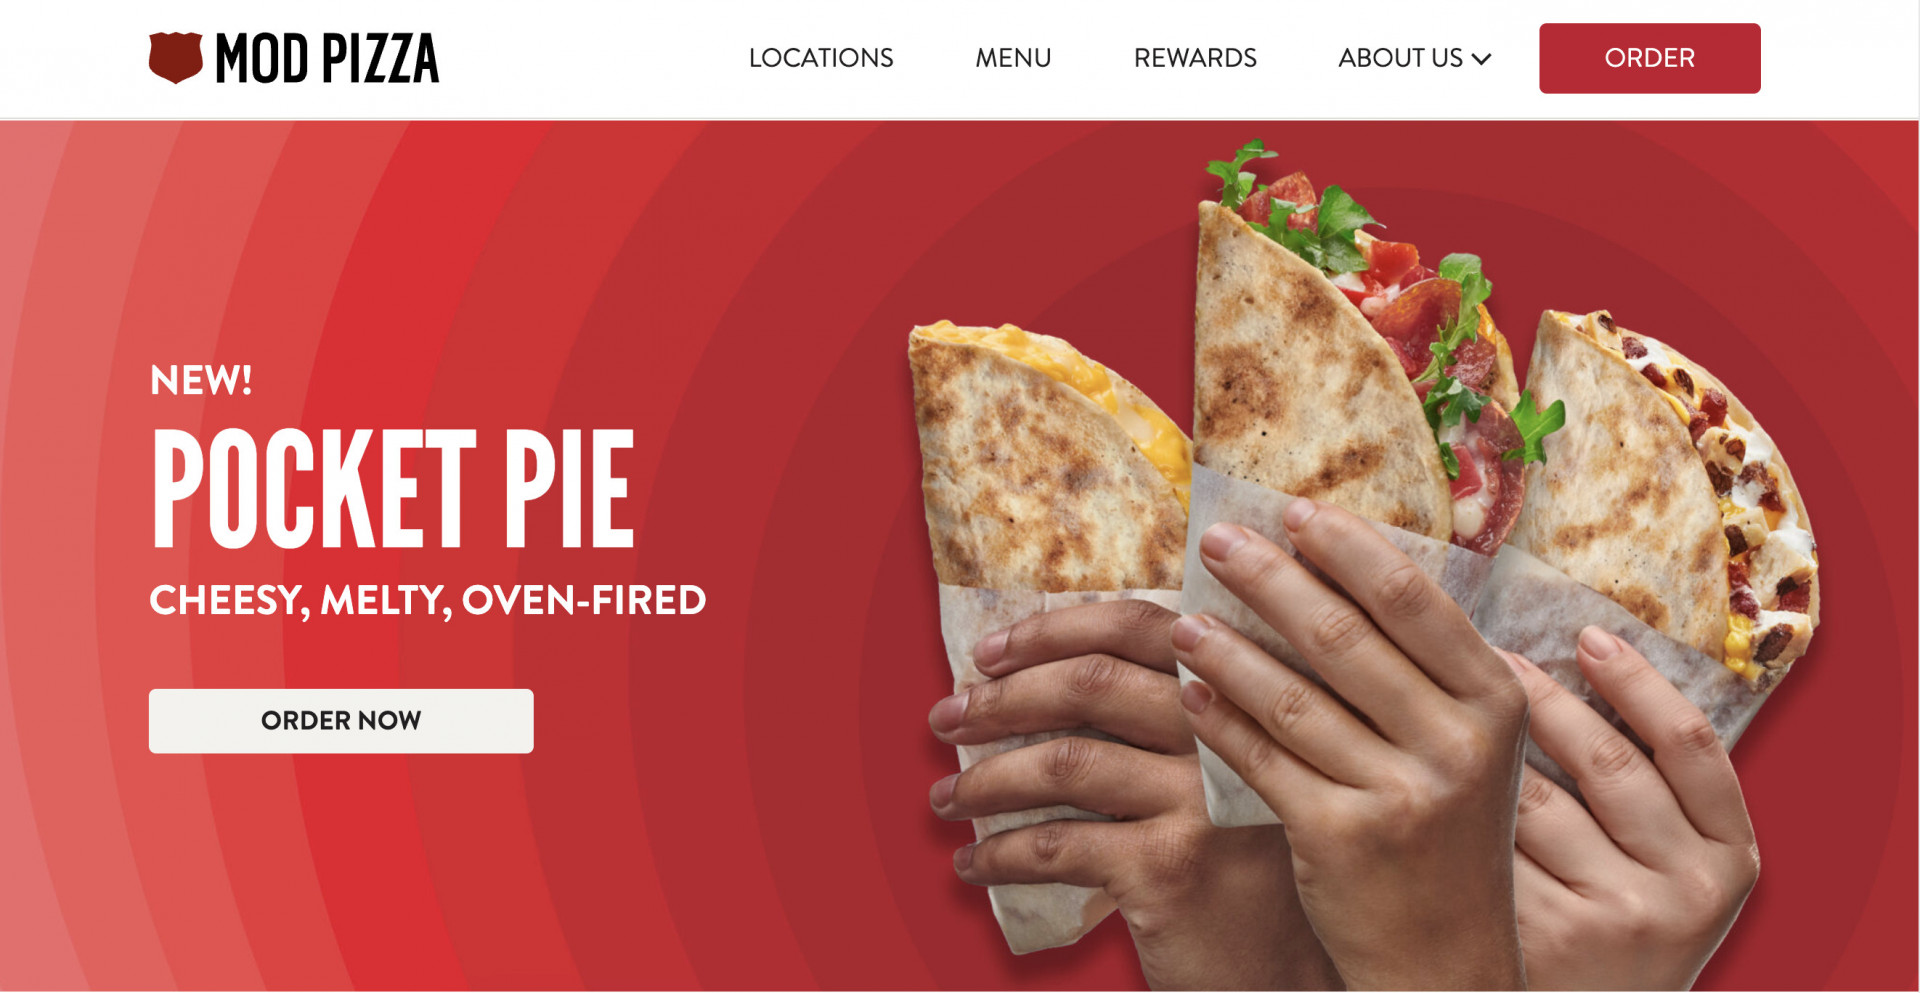 pizza website template example mod pizza